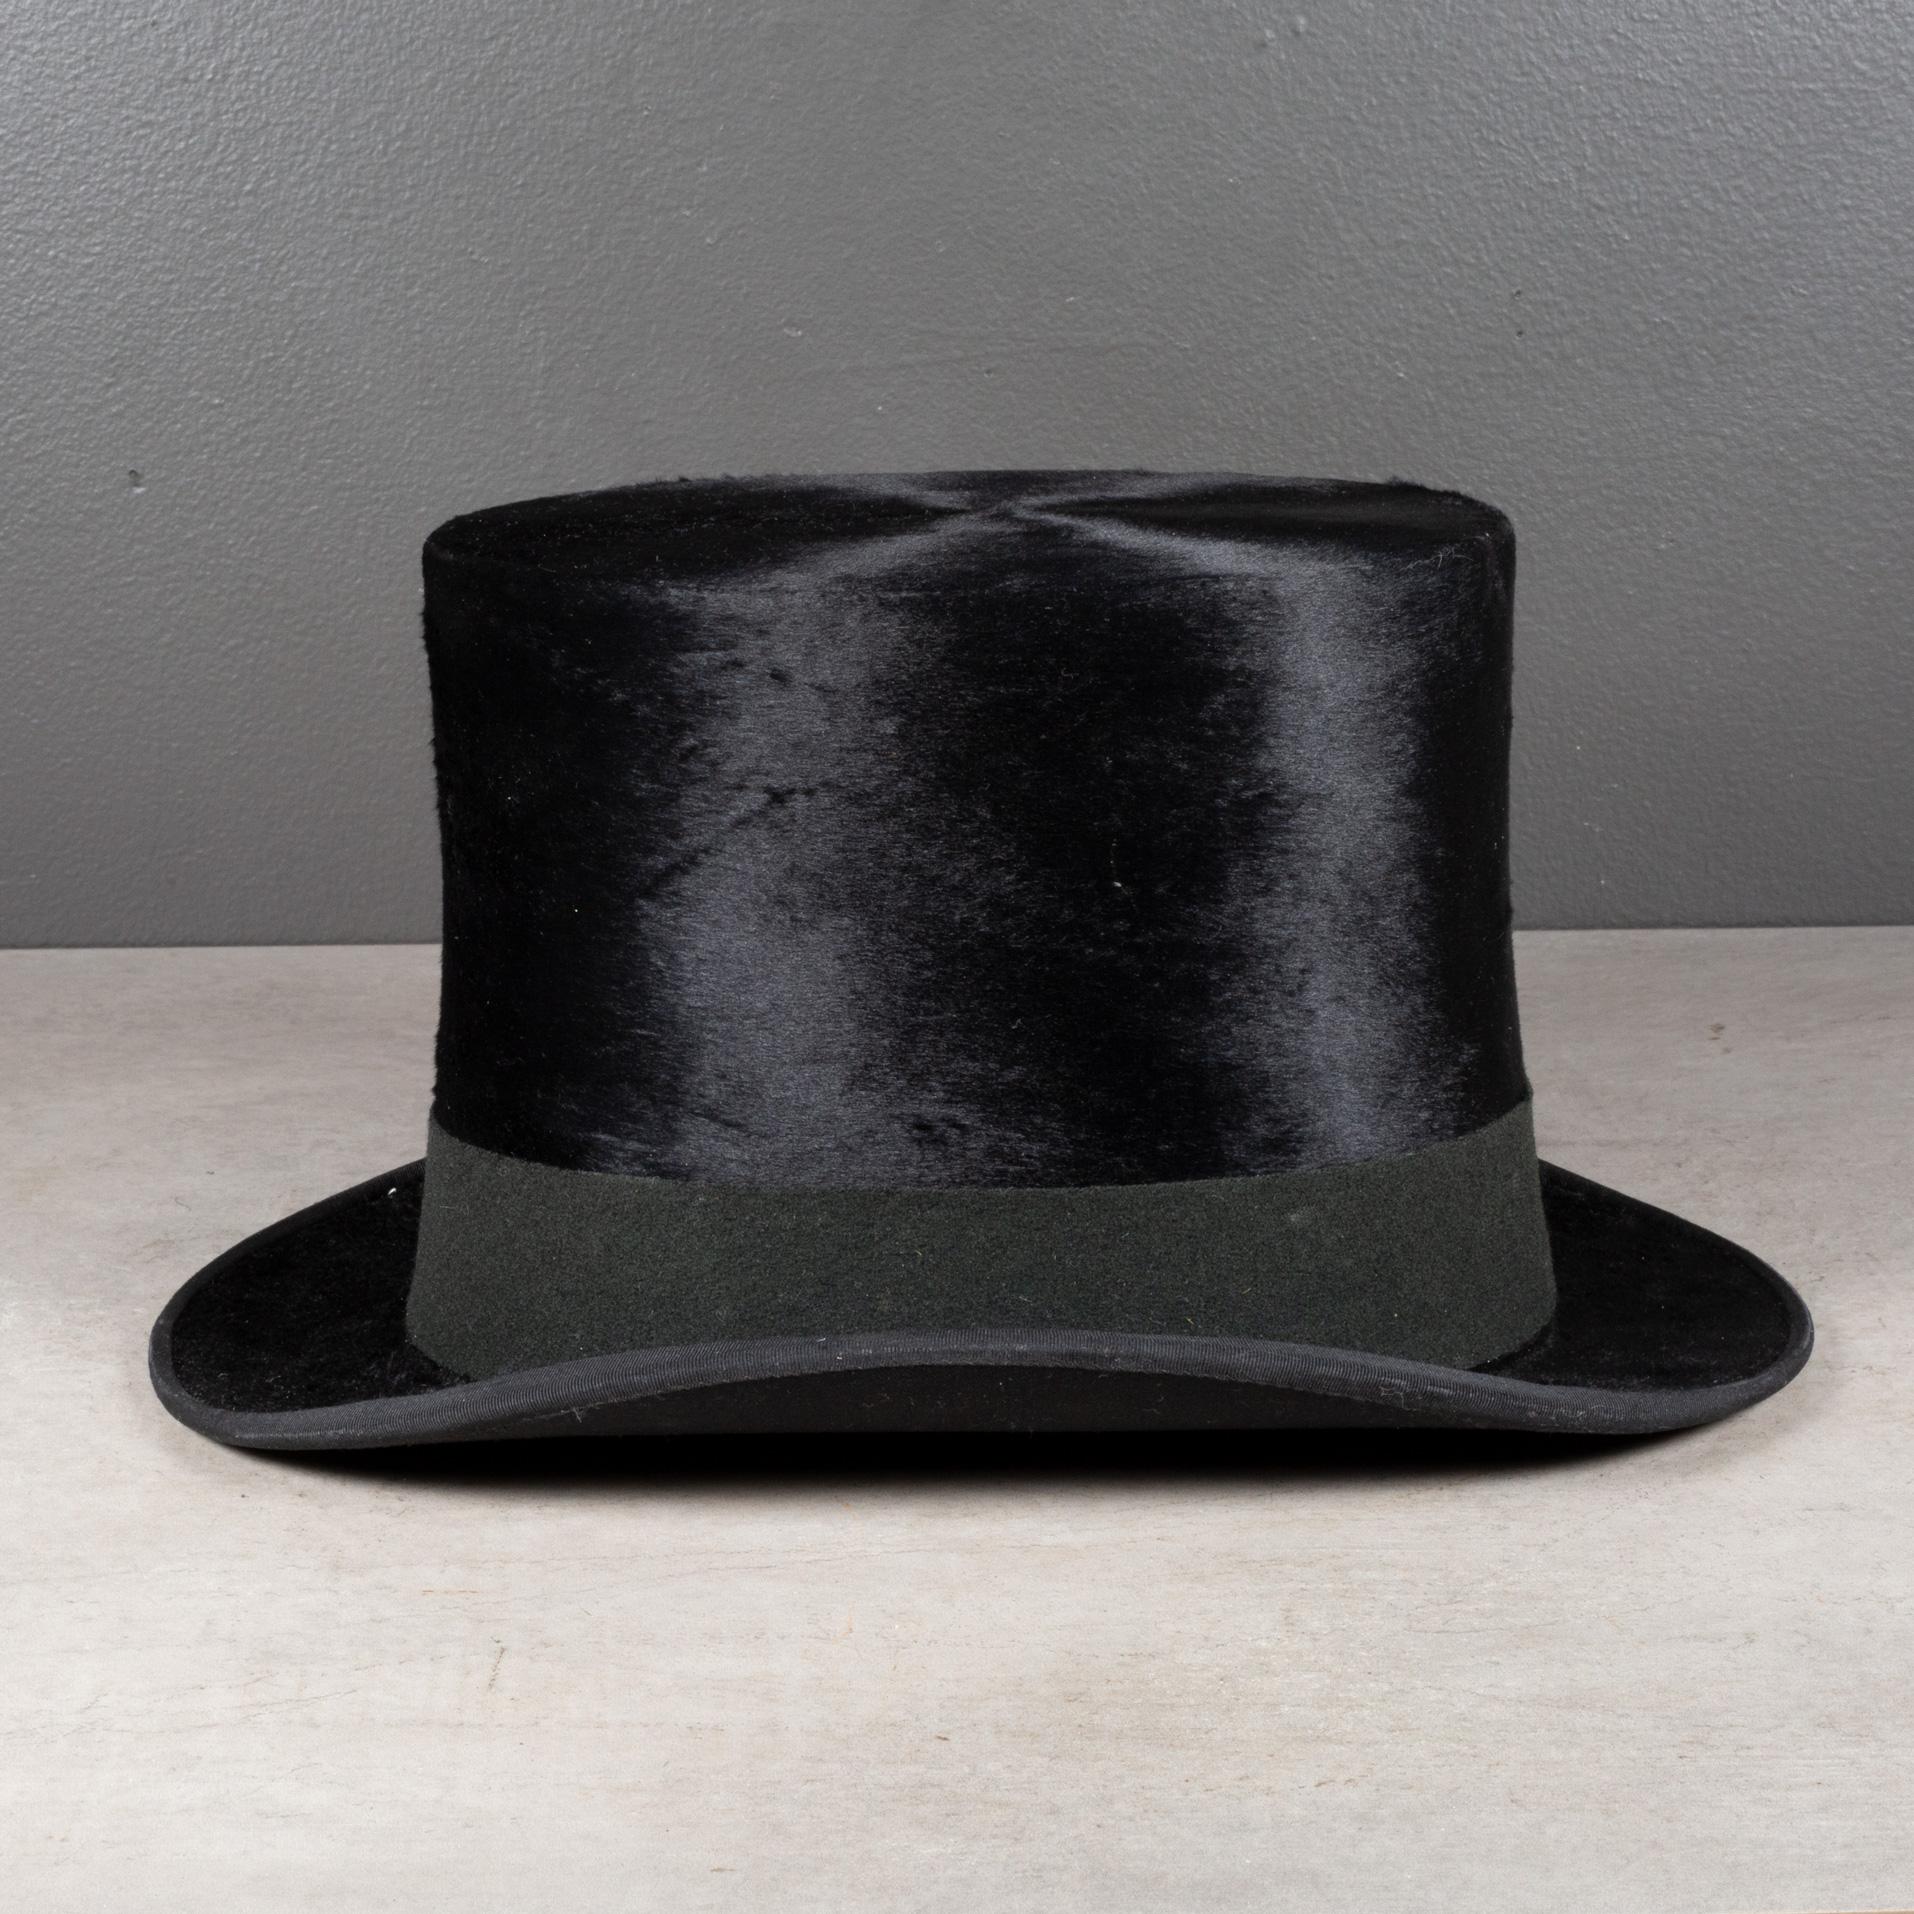 ABOUT

An antique black, Beaver skin top hat with brown leather interior band and fabric. Original label with monogram 